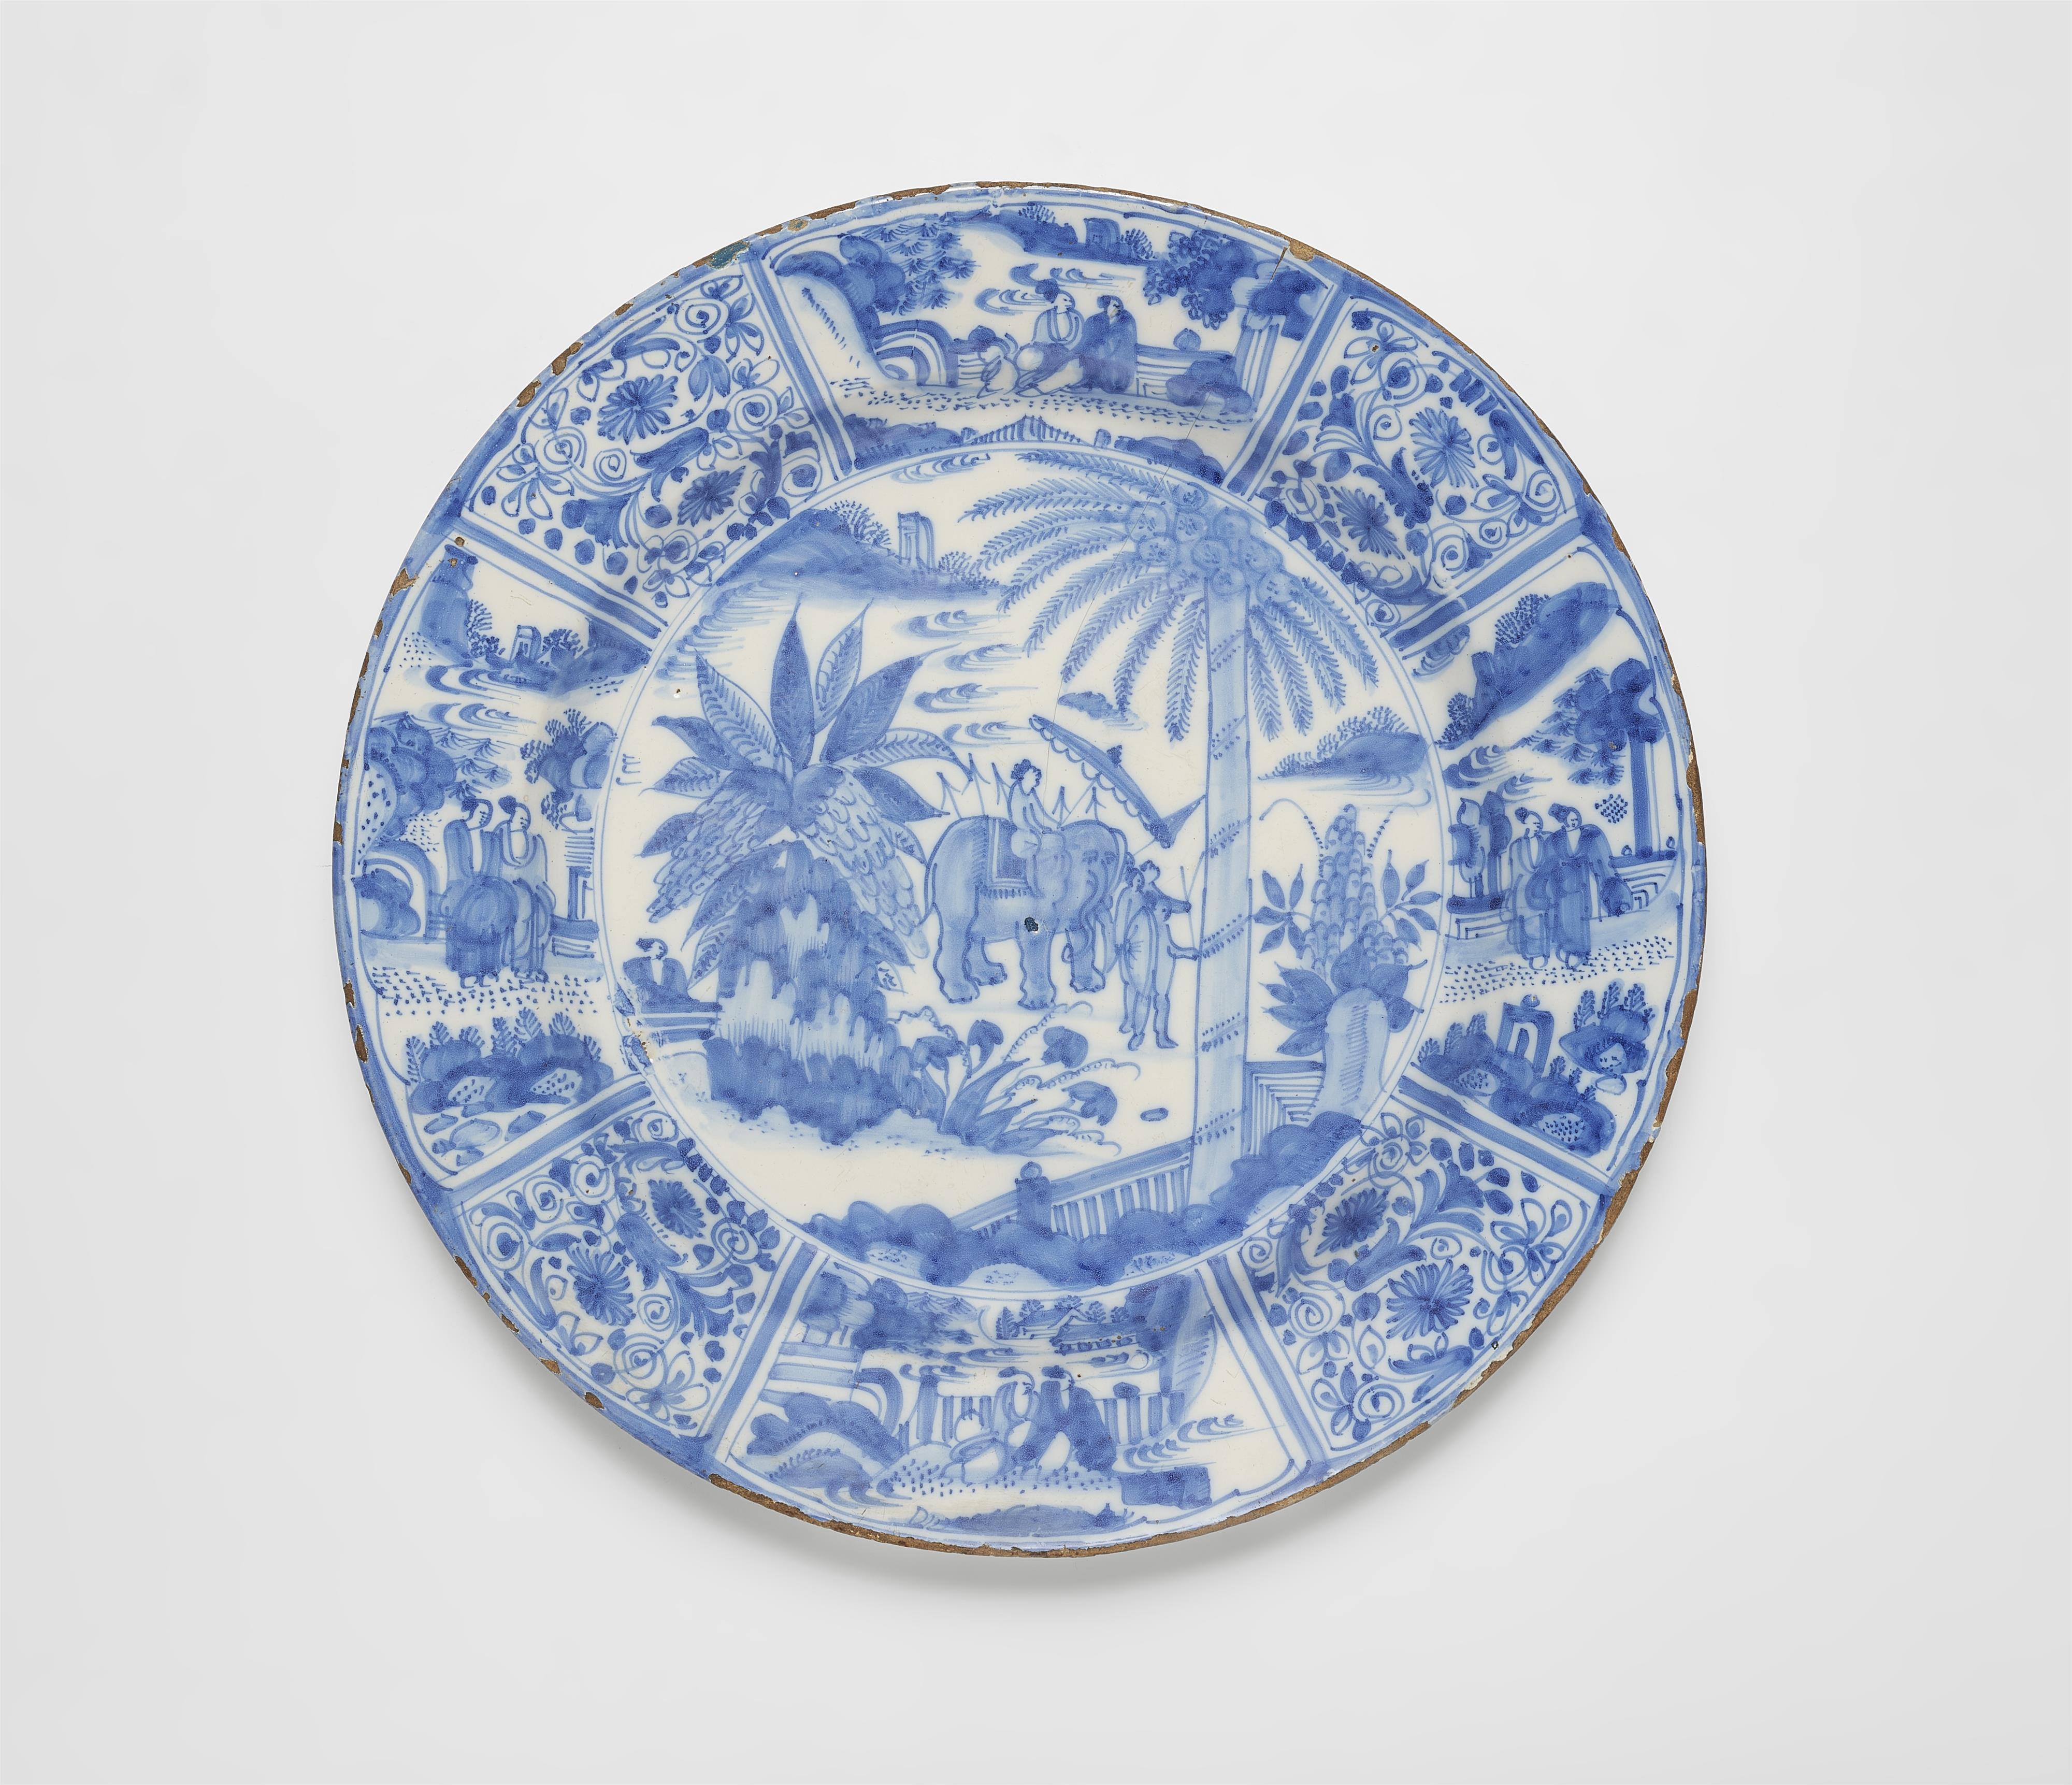 A rare Dutch Delft dish with an elephant and rider - image-1